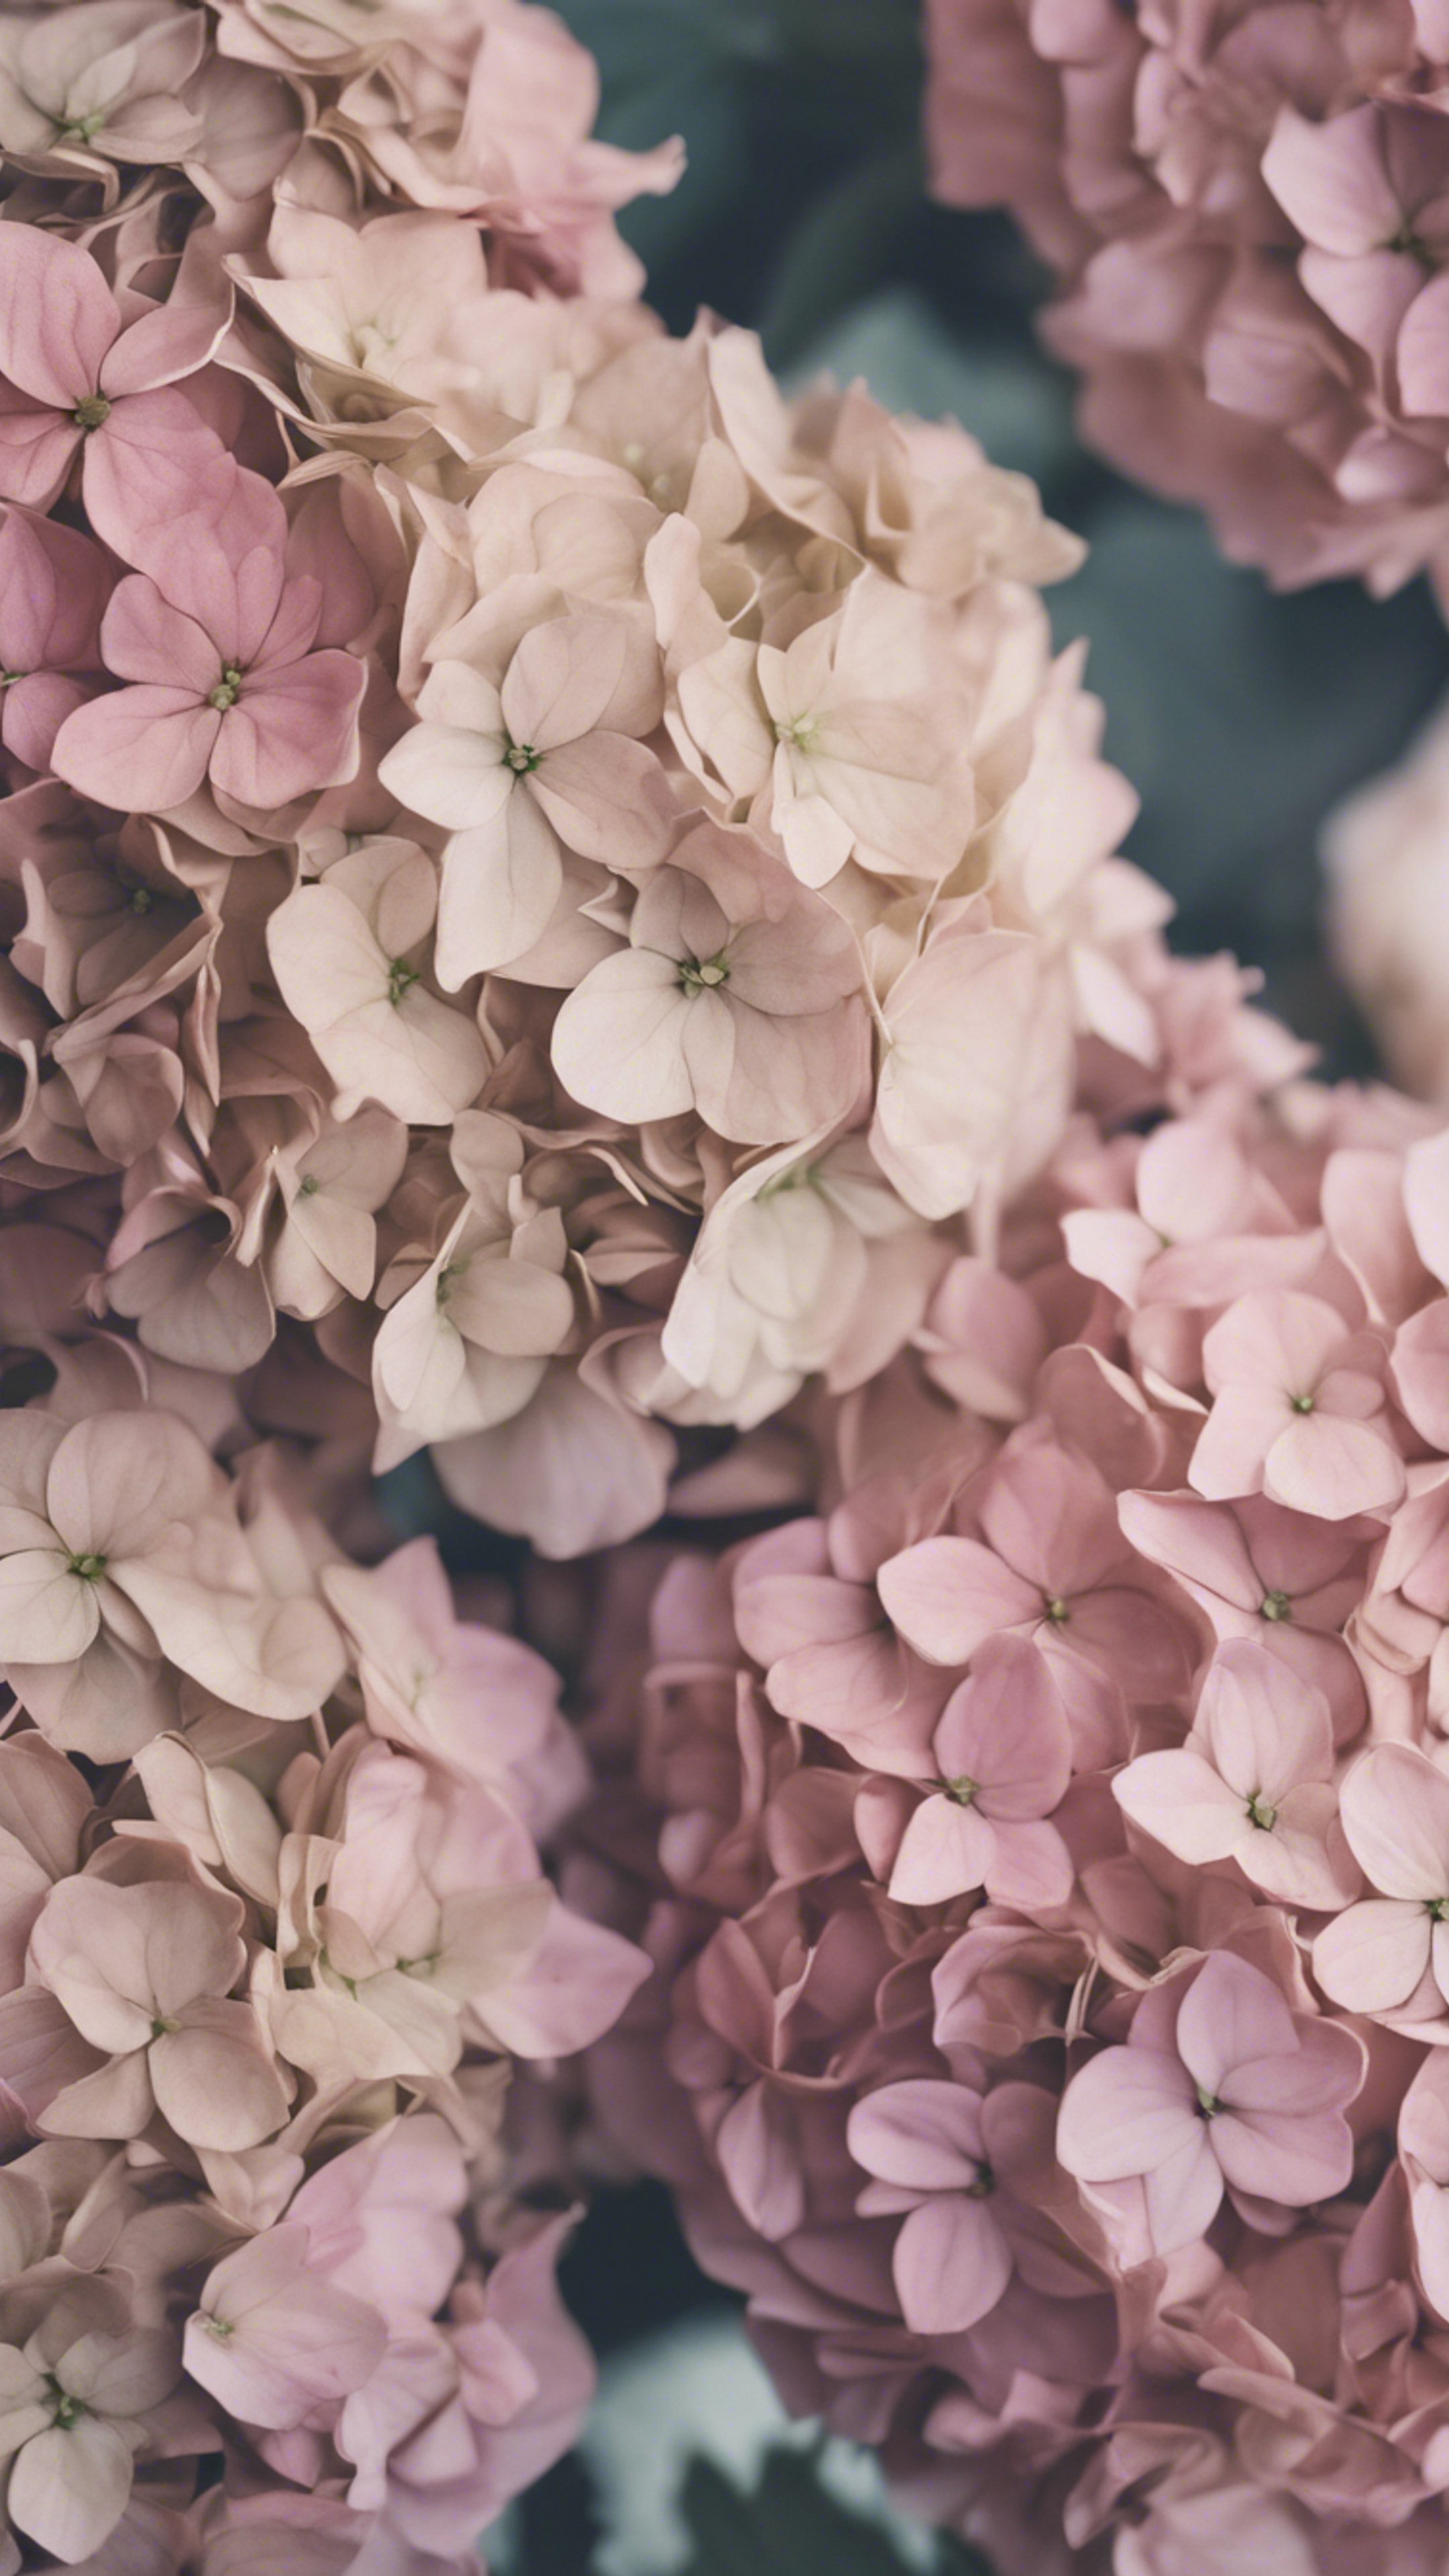 An antique floral pattern with delicate hydrangeas in a hue of vintage pink. Тапет[d61dab8ff010416797b3]